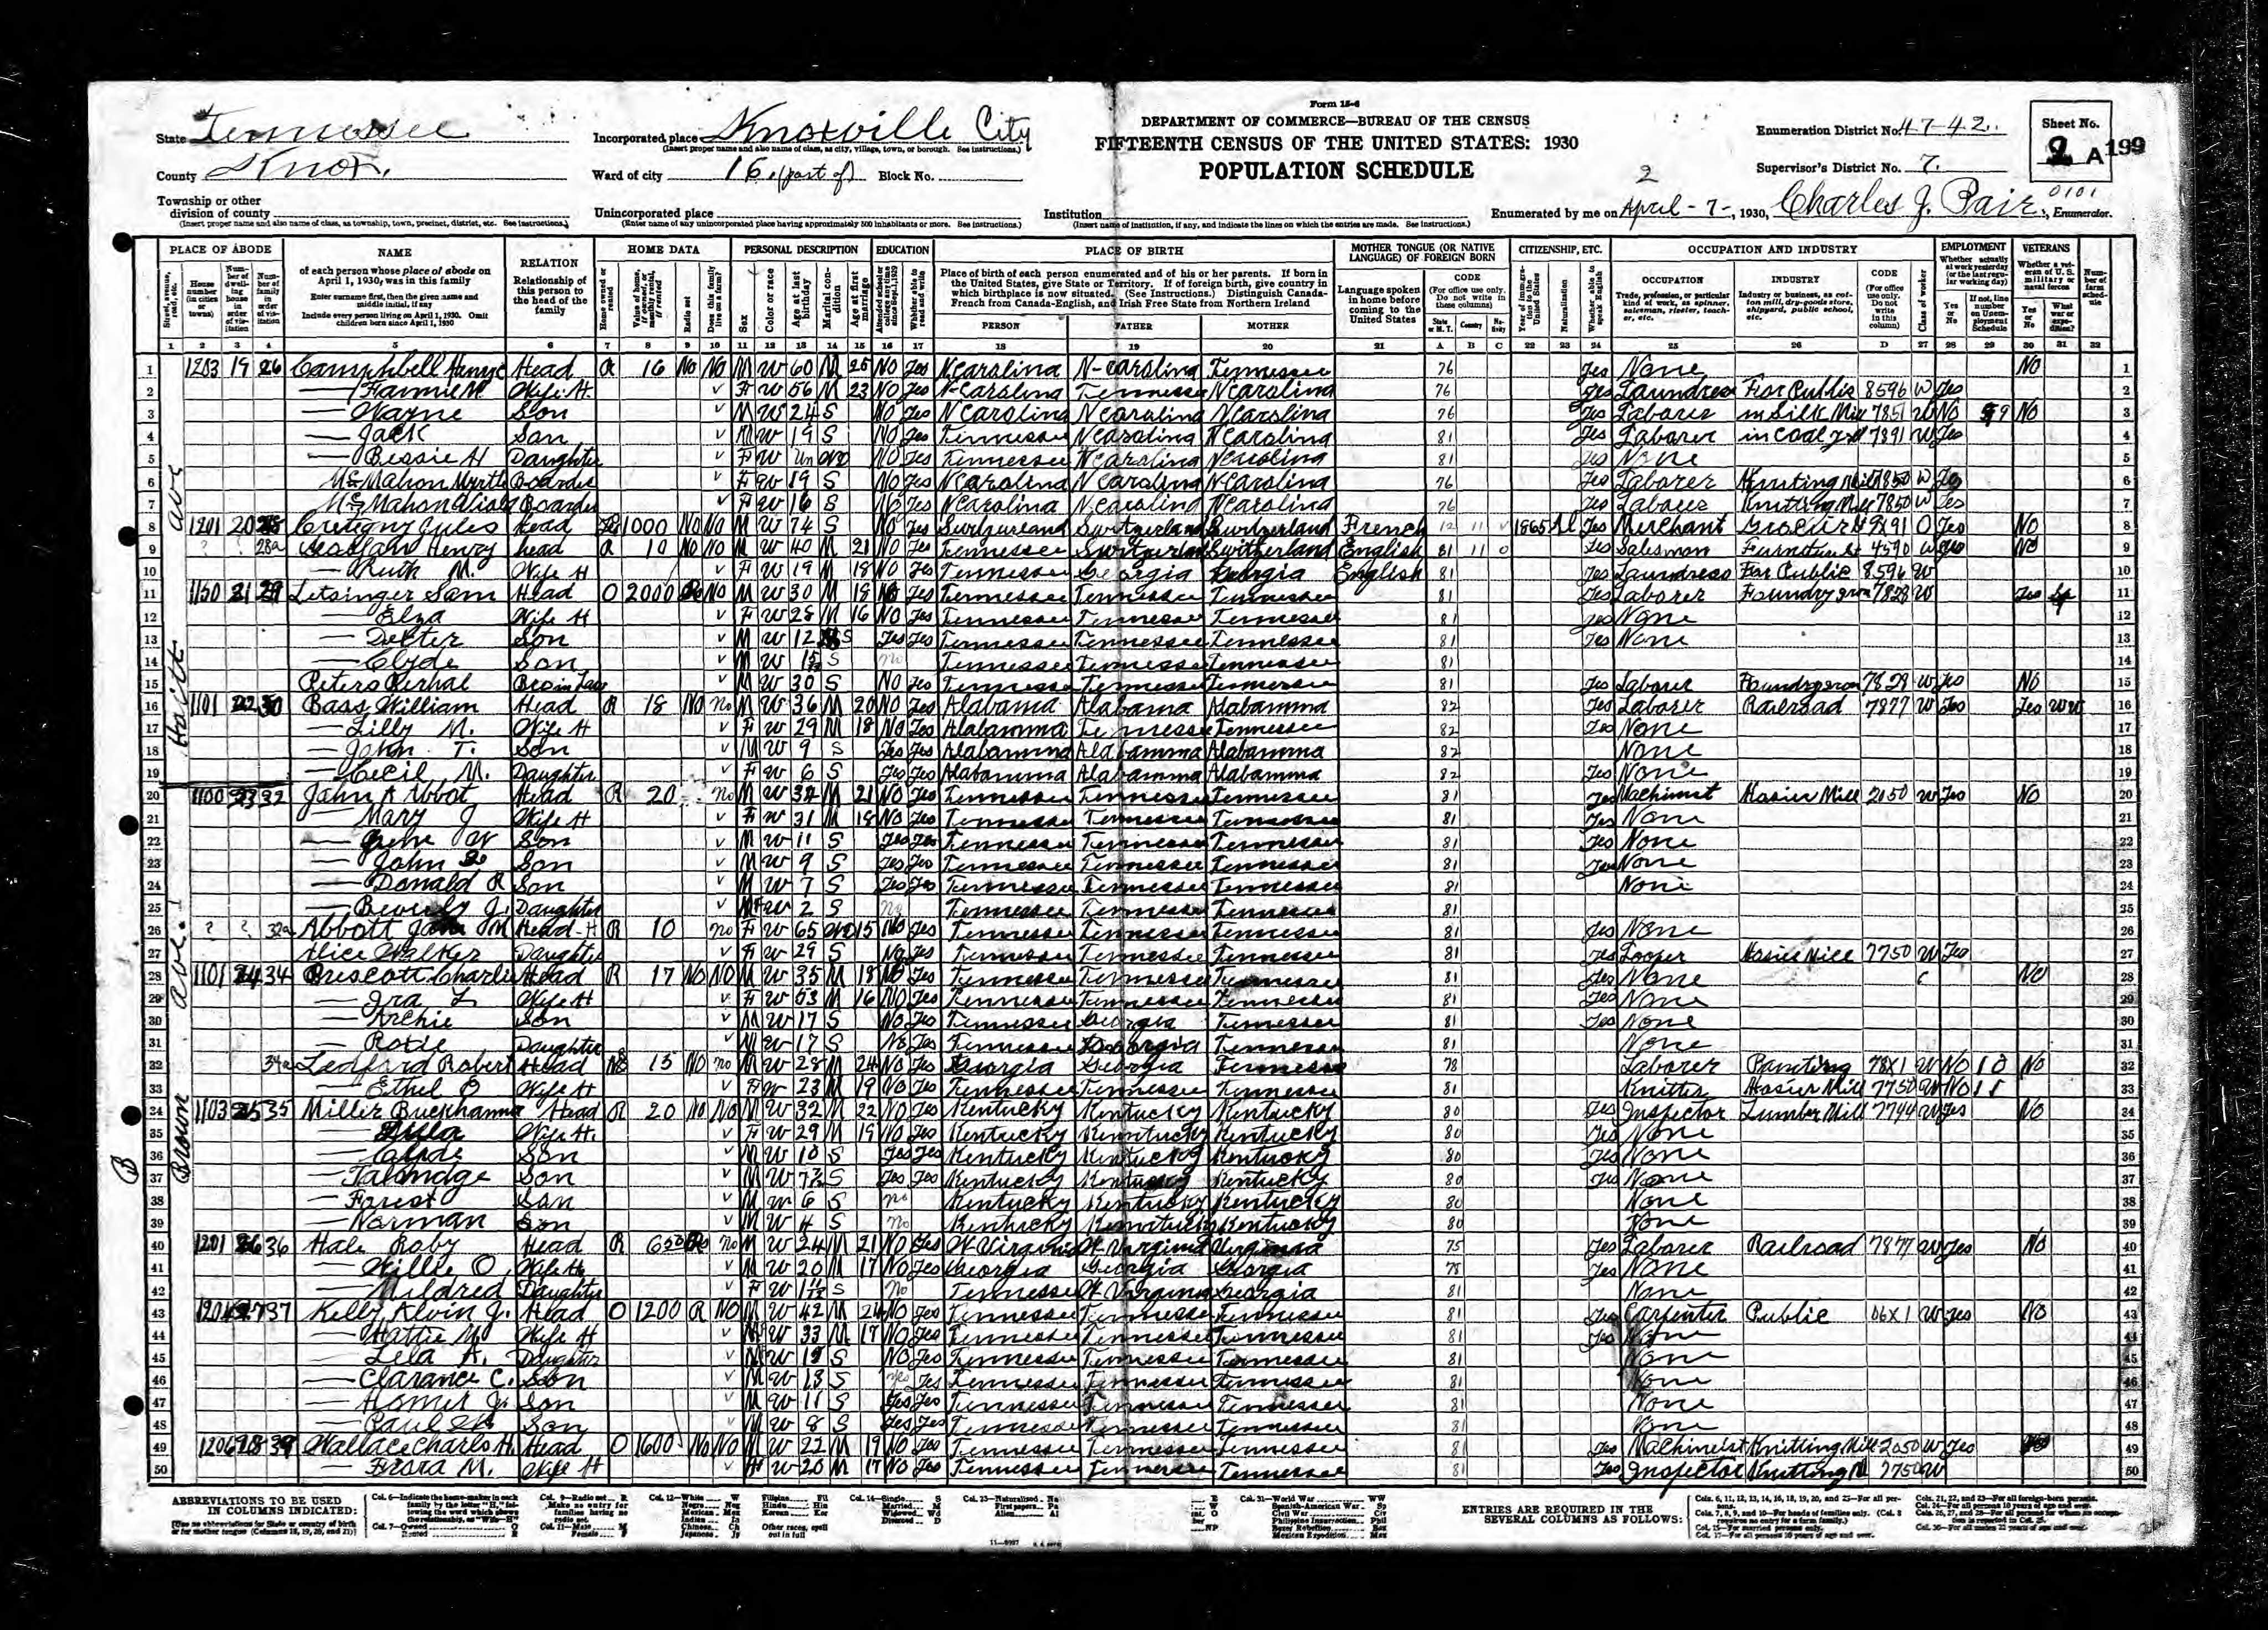 1930 Census, Knox County, Tennessee4096 x 2944